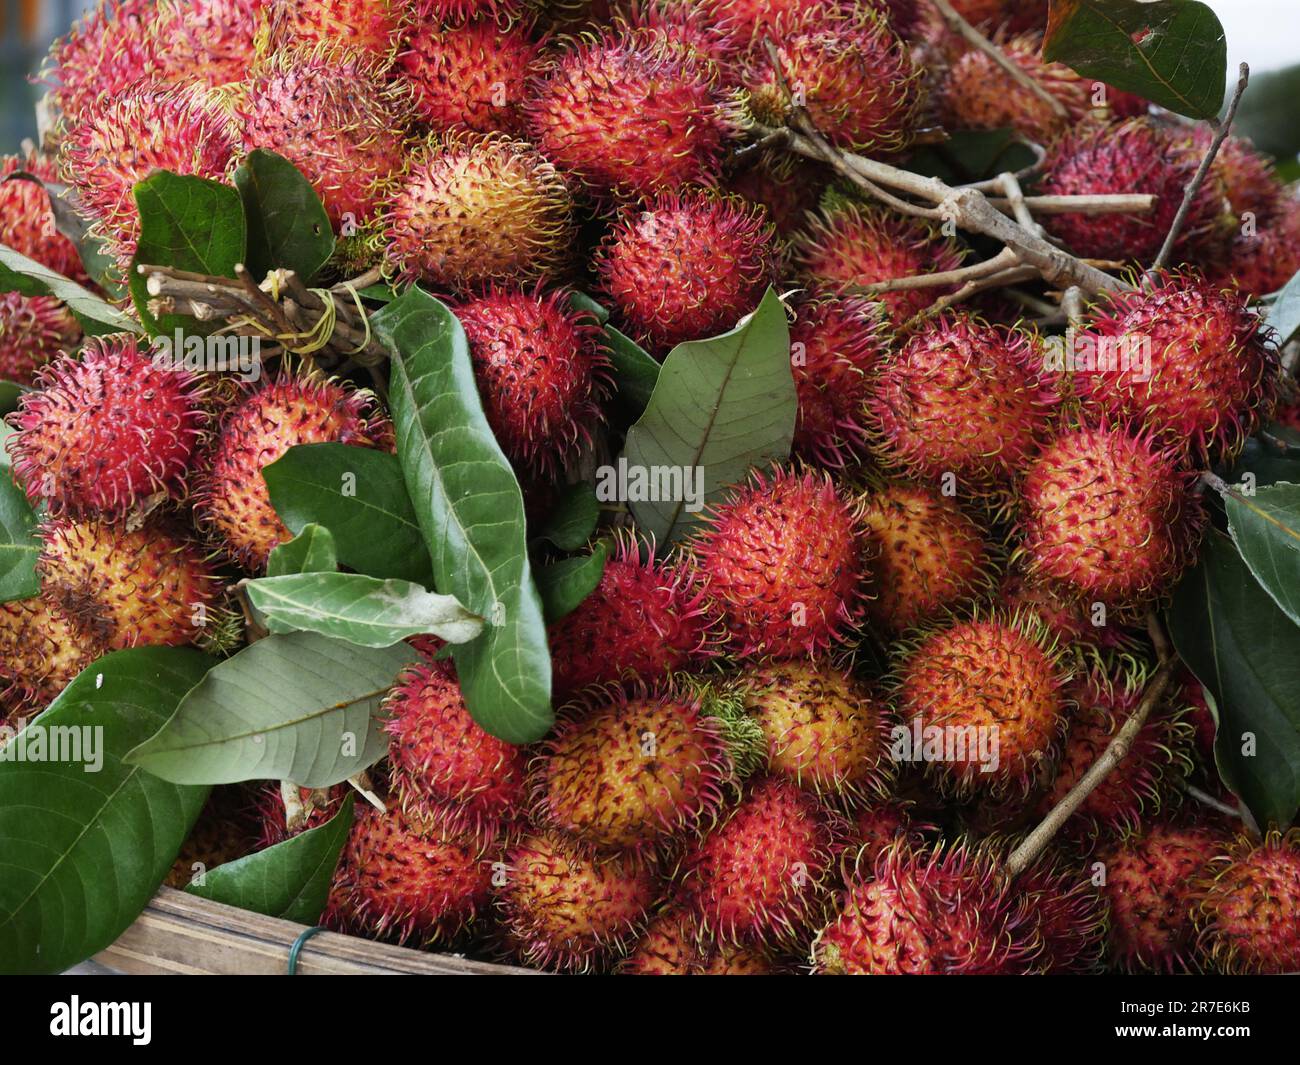 Vietnam, Quang Nam Province, Hoi An City, the Market, stall with Rambutans, nephelium lappaceum Stock Photo